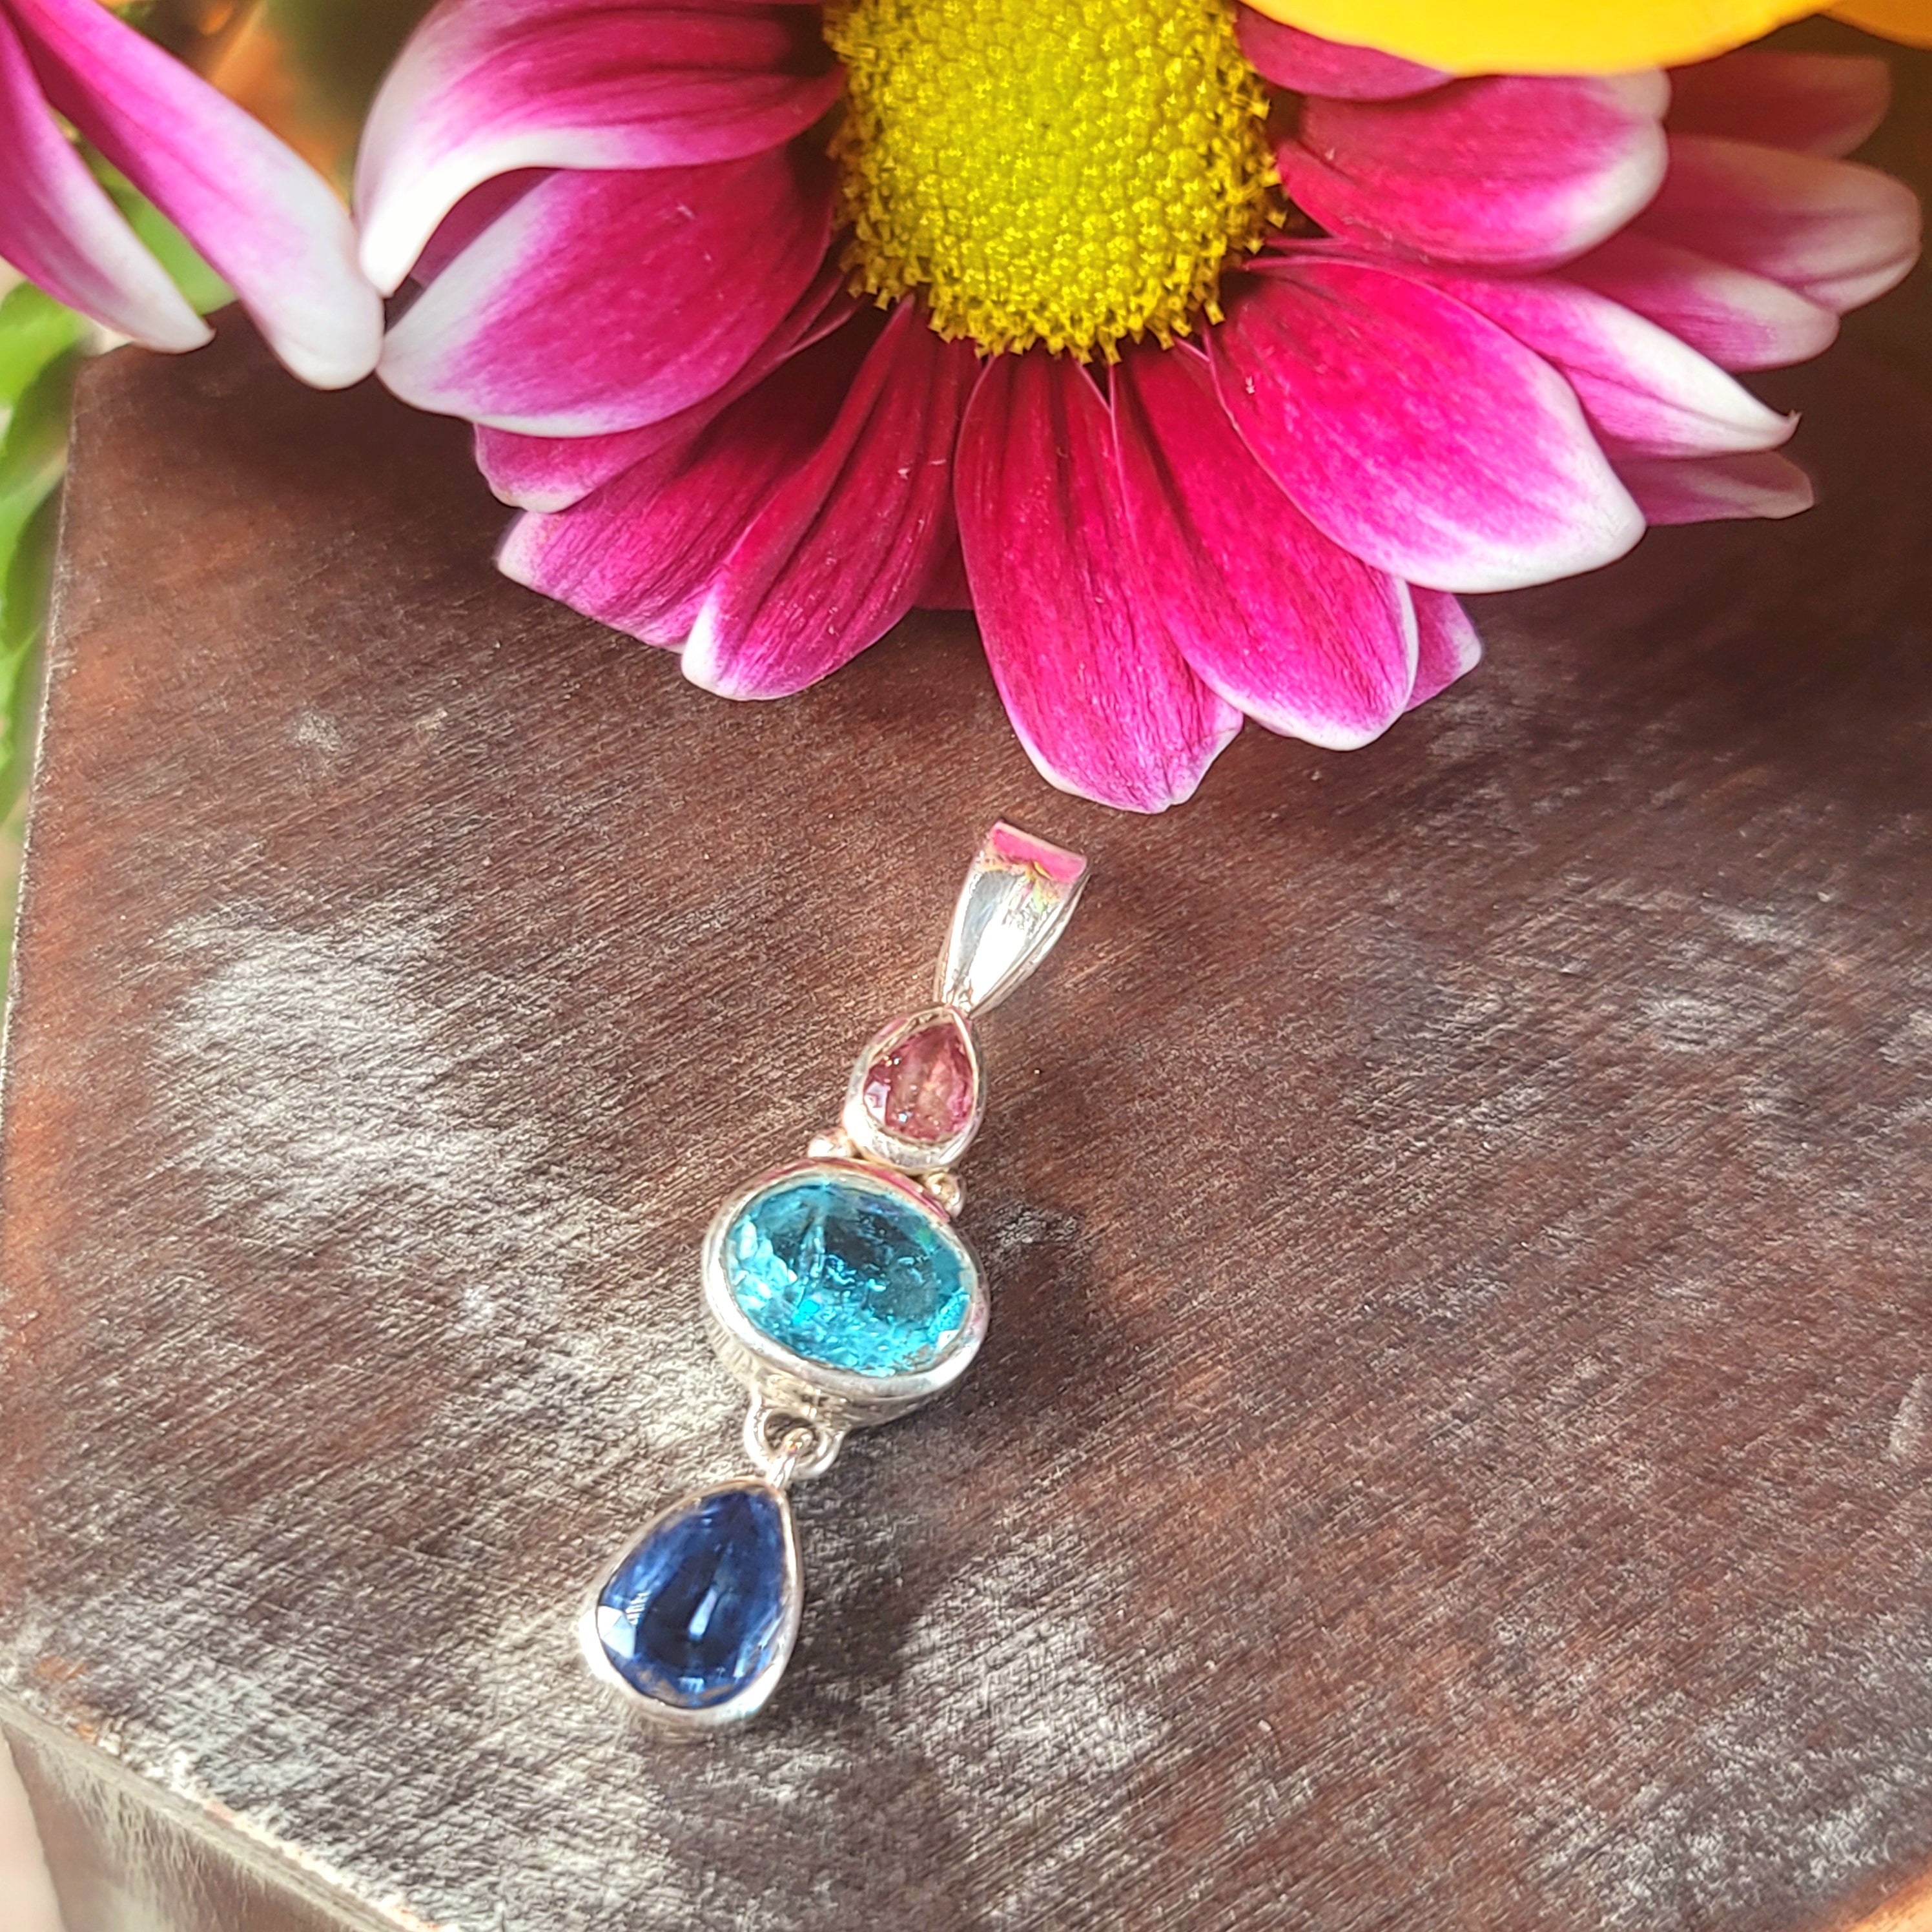 Blue Kyanite x Blue Apatite X Pink Tourmaline .925 Silver Pendant for Support on a New Beginning